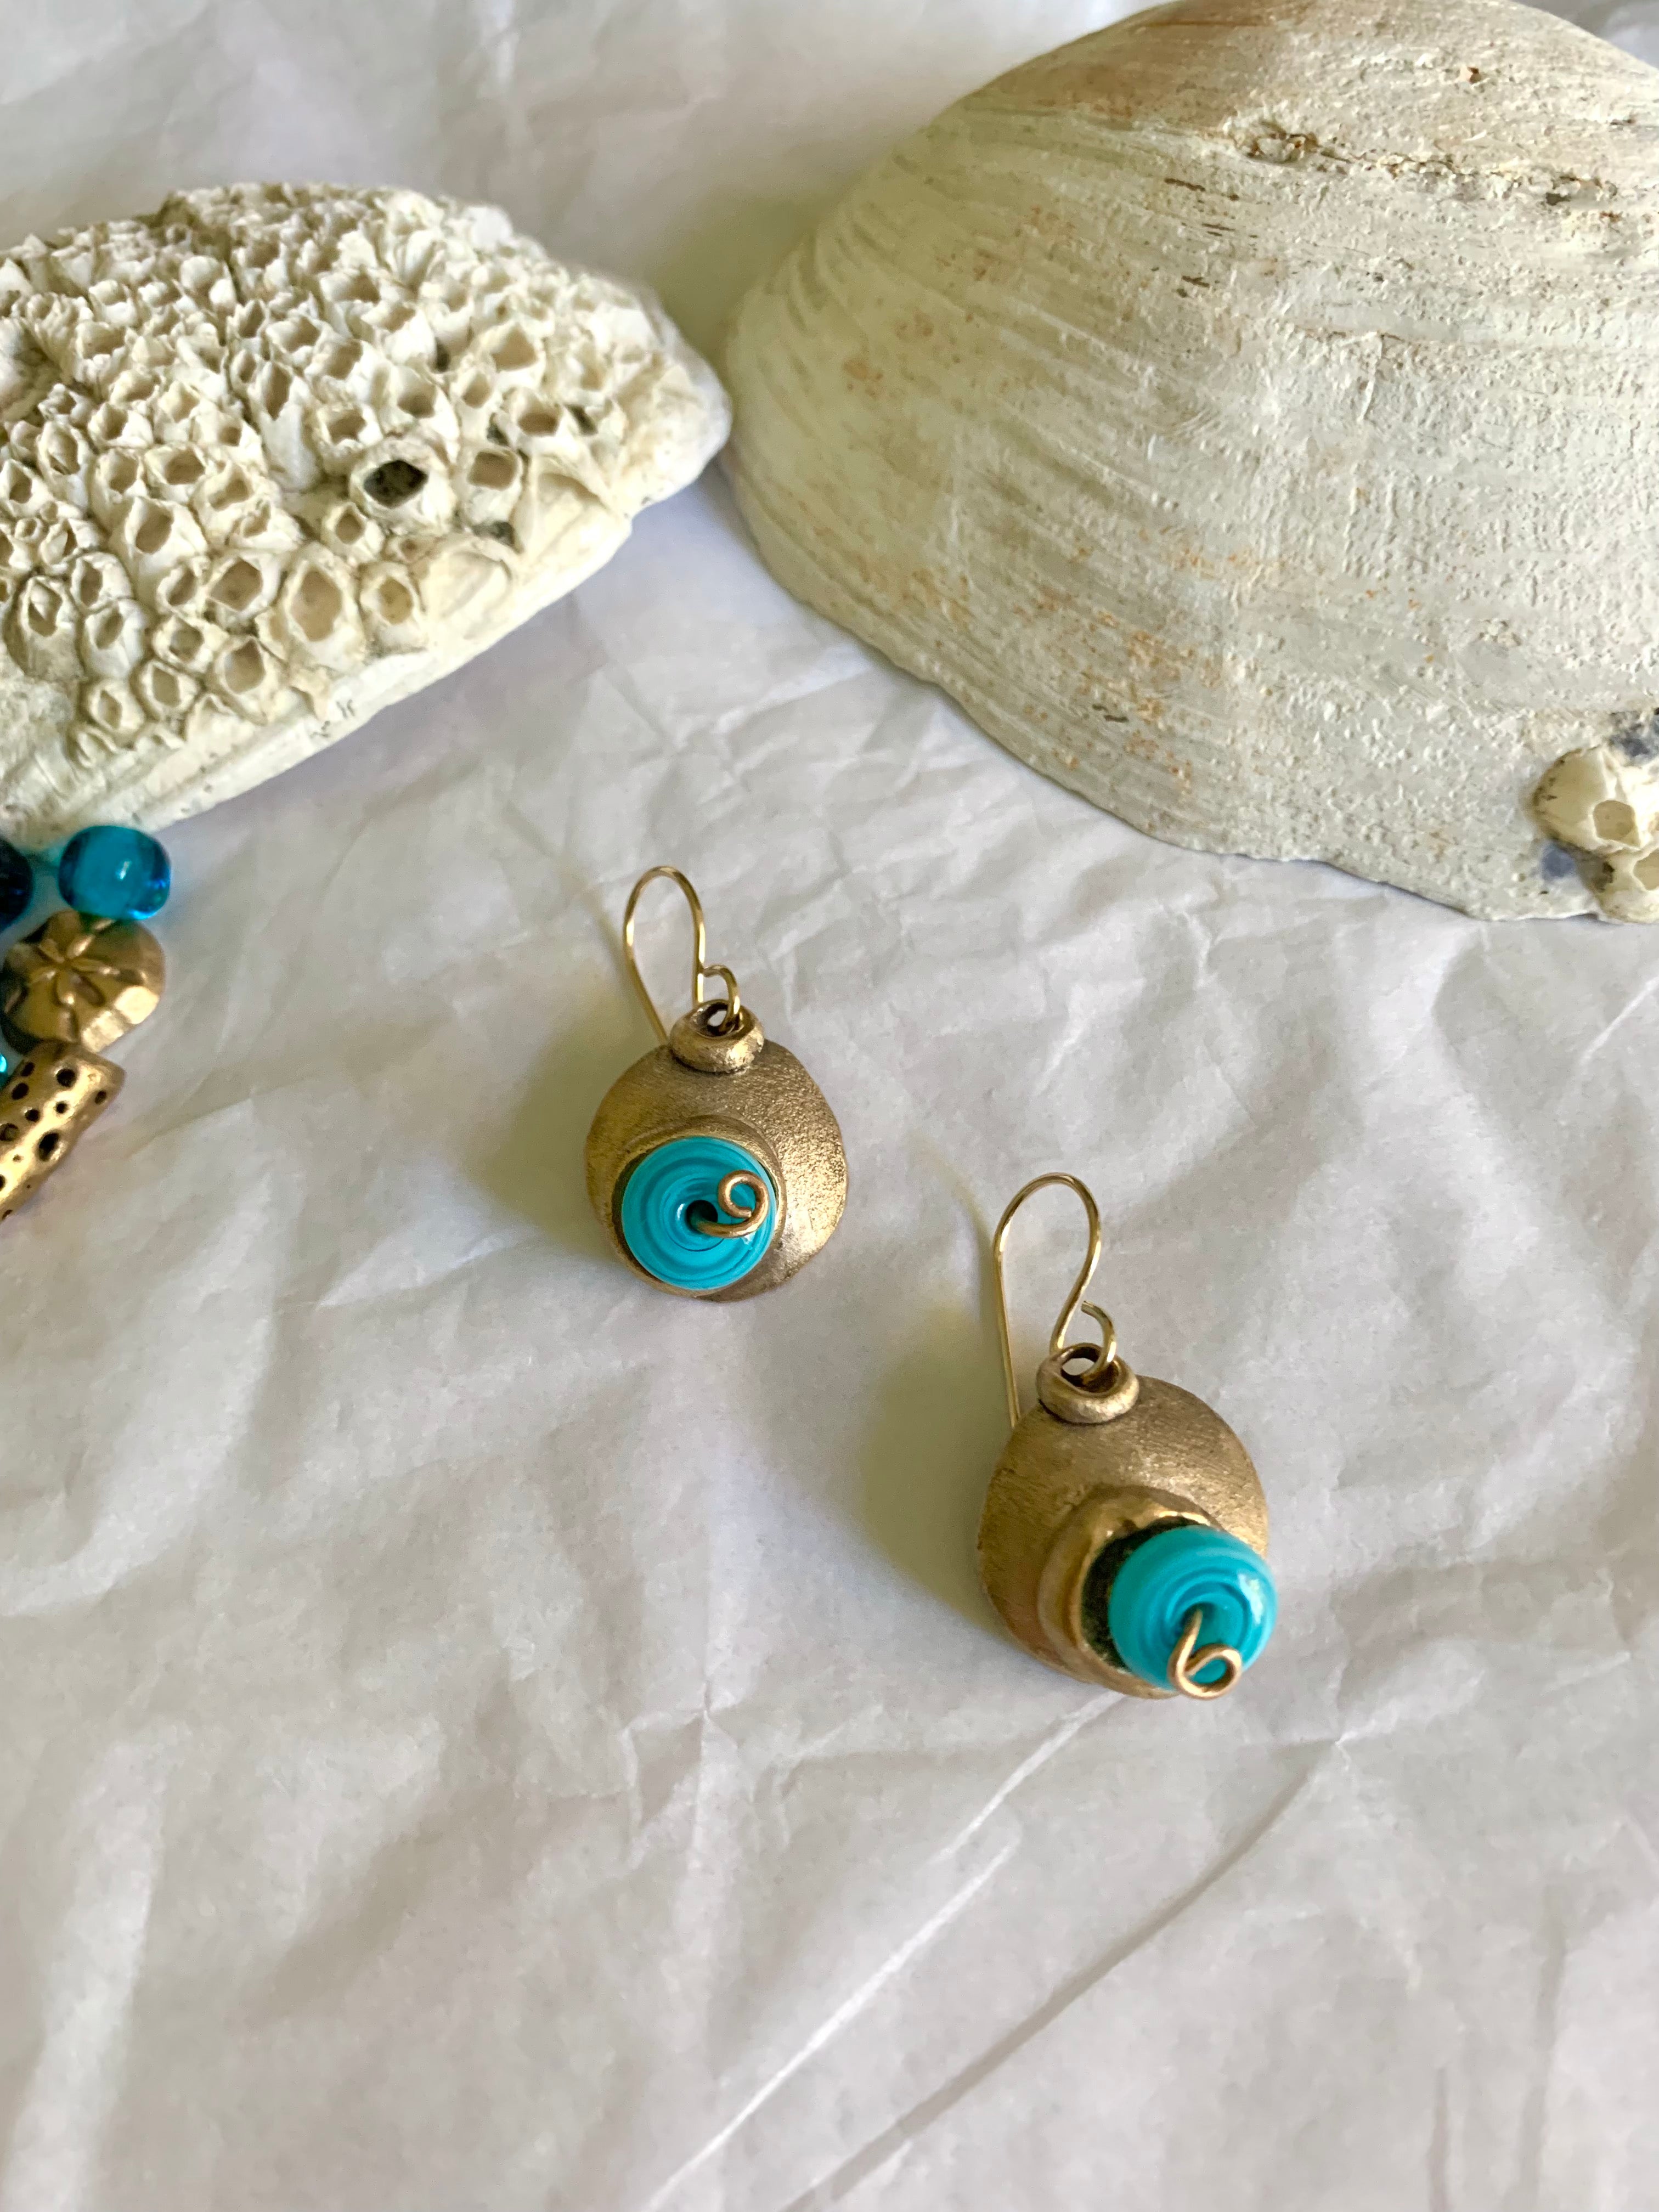 Summer earrings with ocean blue glass beads and bronze